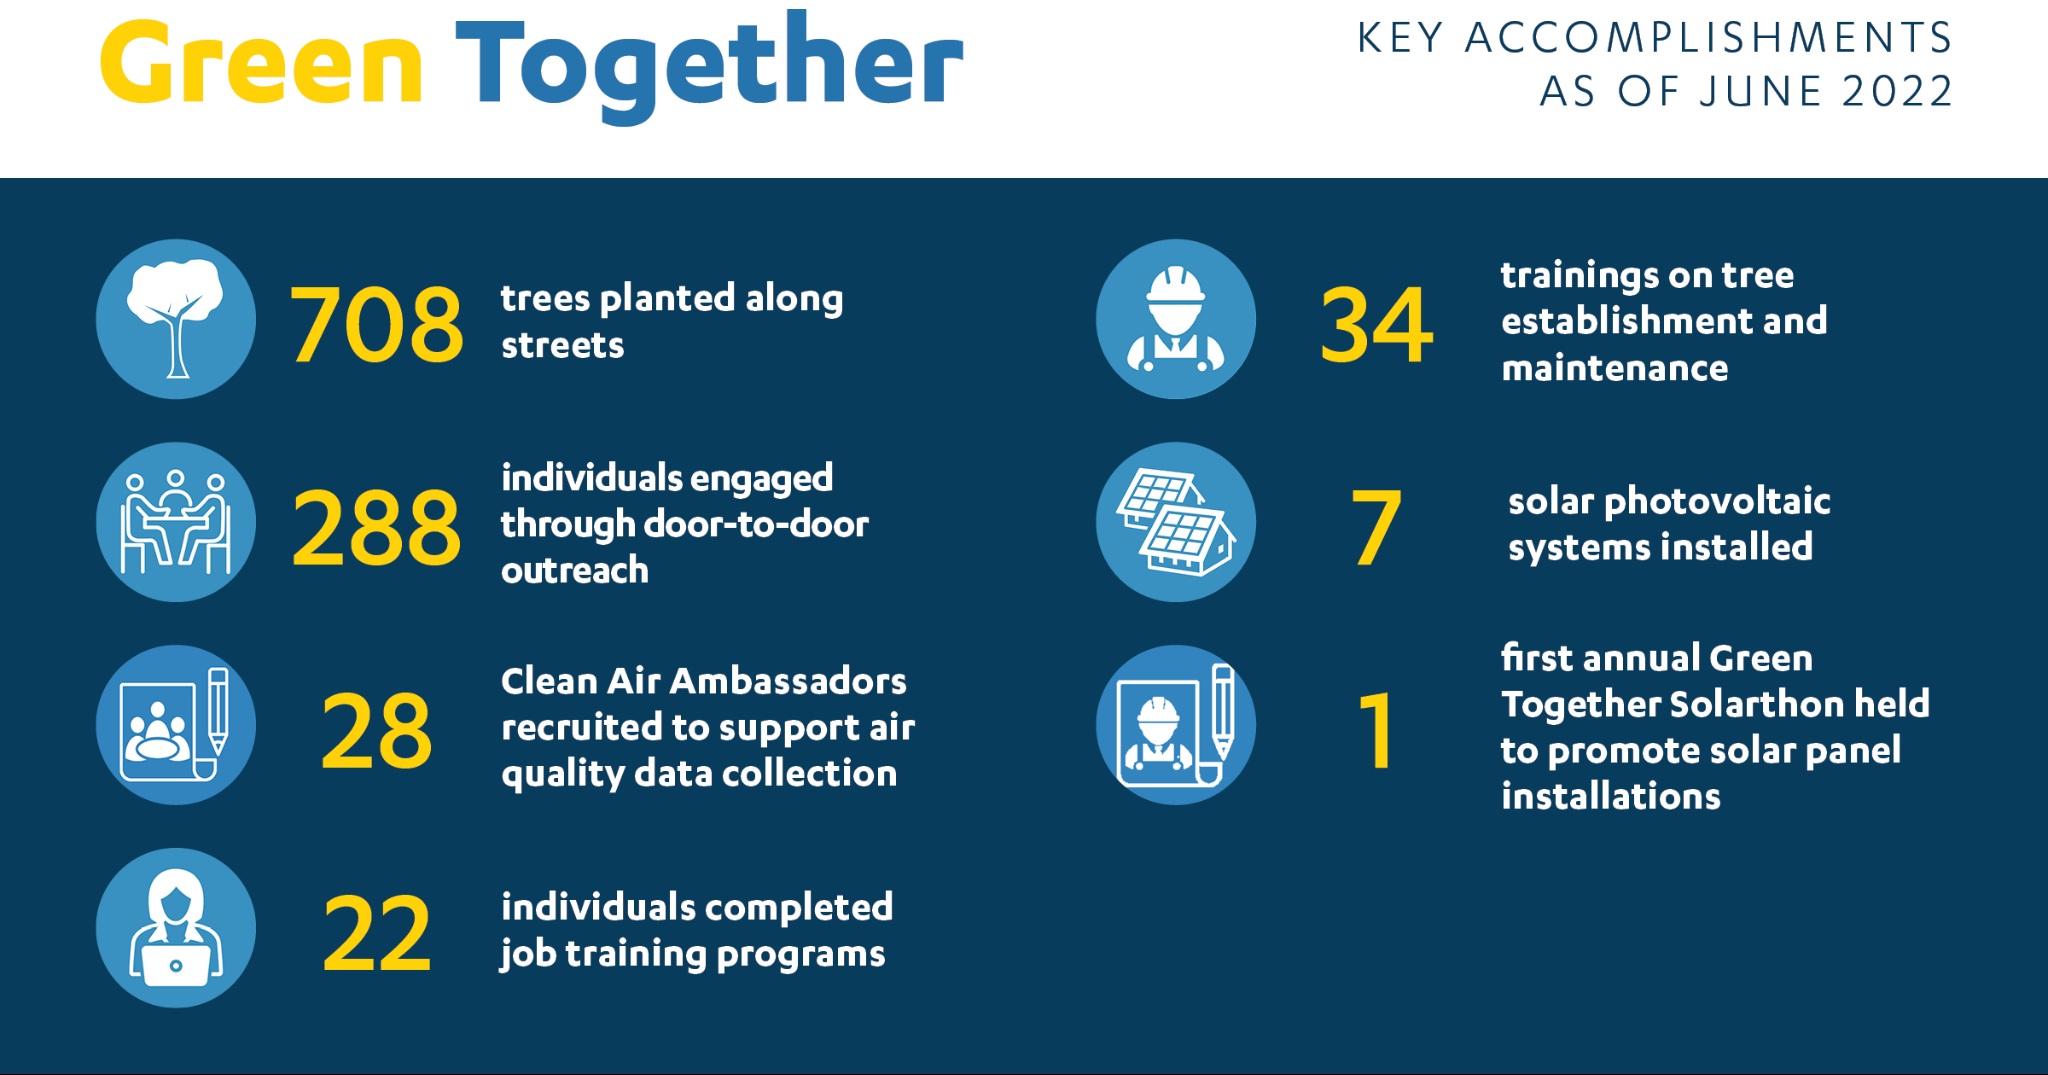 Green Together: Key Accomplishments as of June 2022